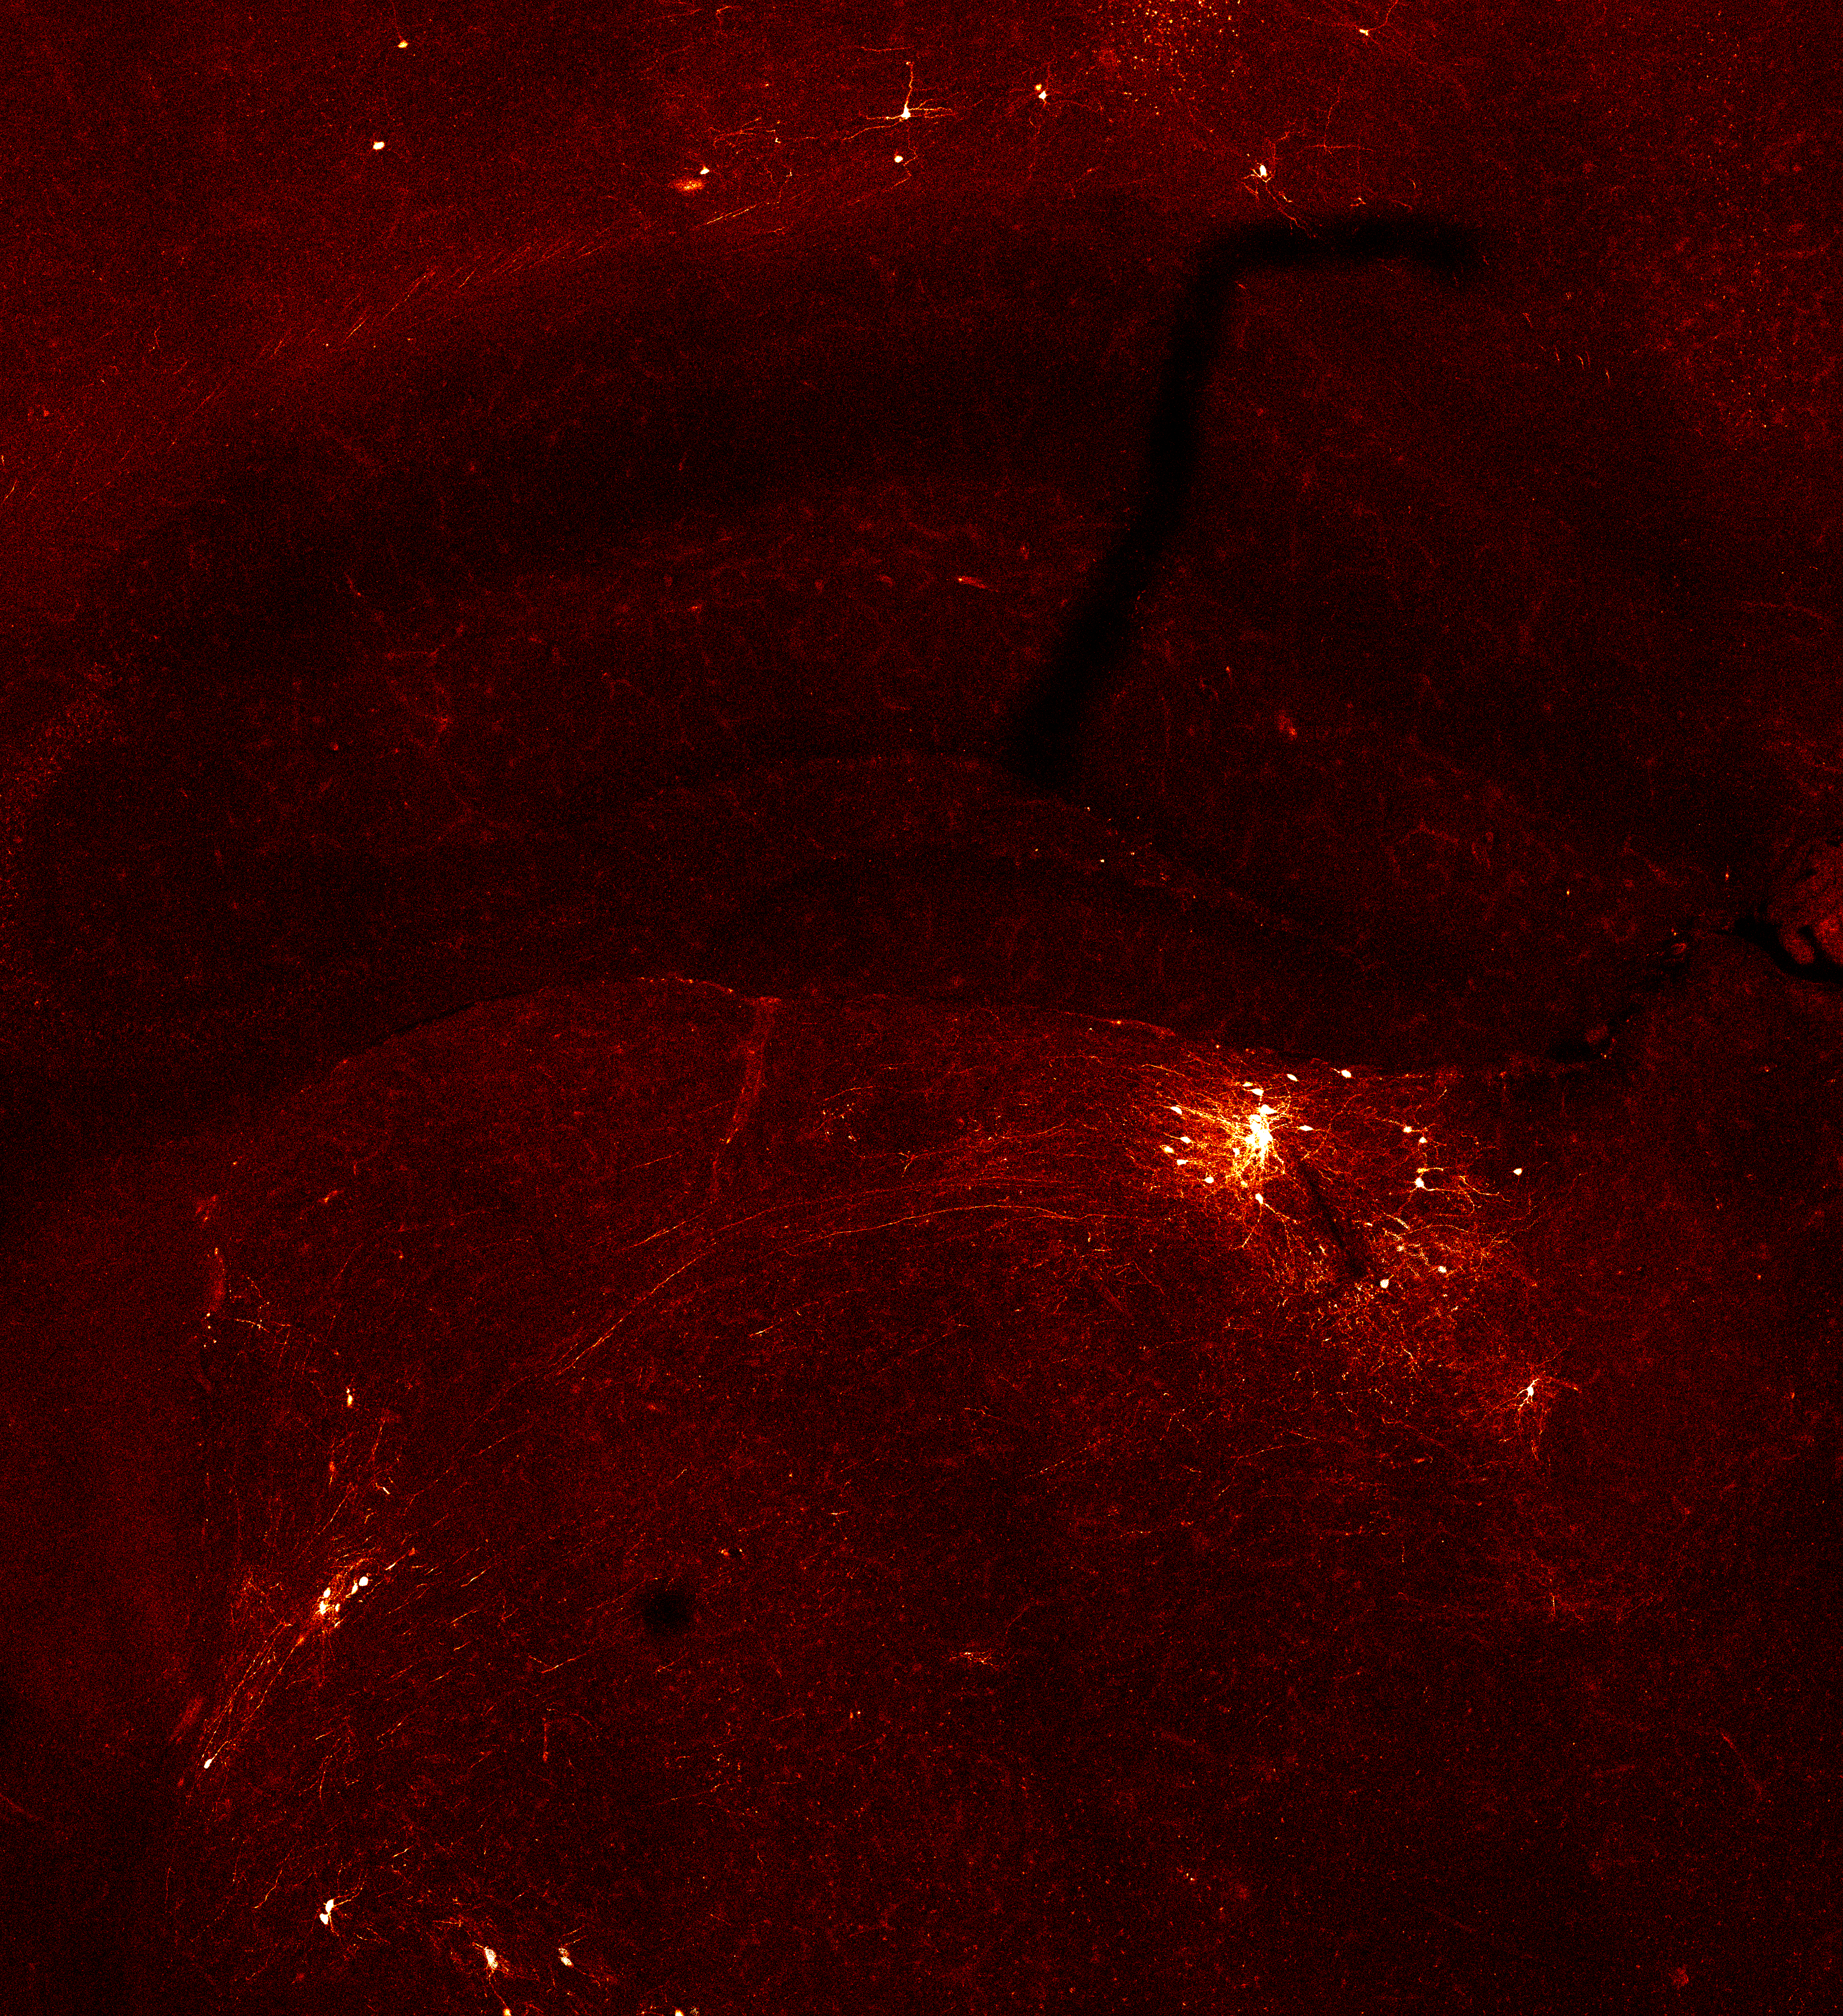 Isloated clusters of neurons glow orange-yellow amid a dark background